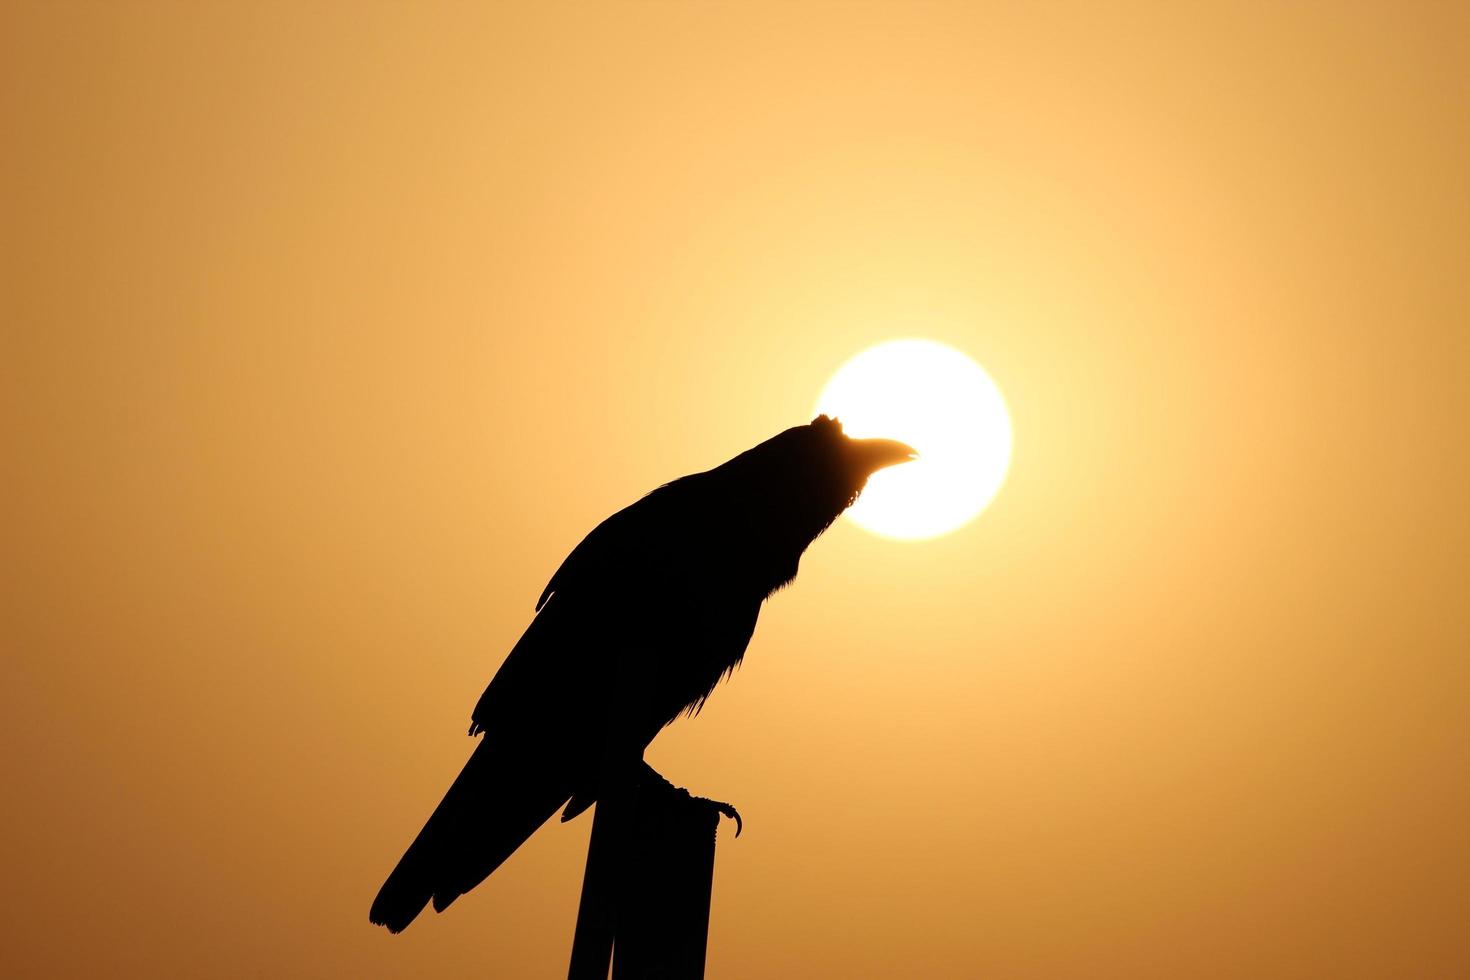 Silhouette of a raven perched on a wooden plank during a beautiful sunset photo